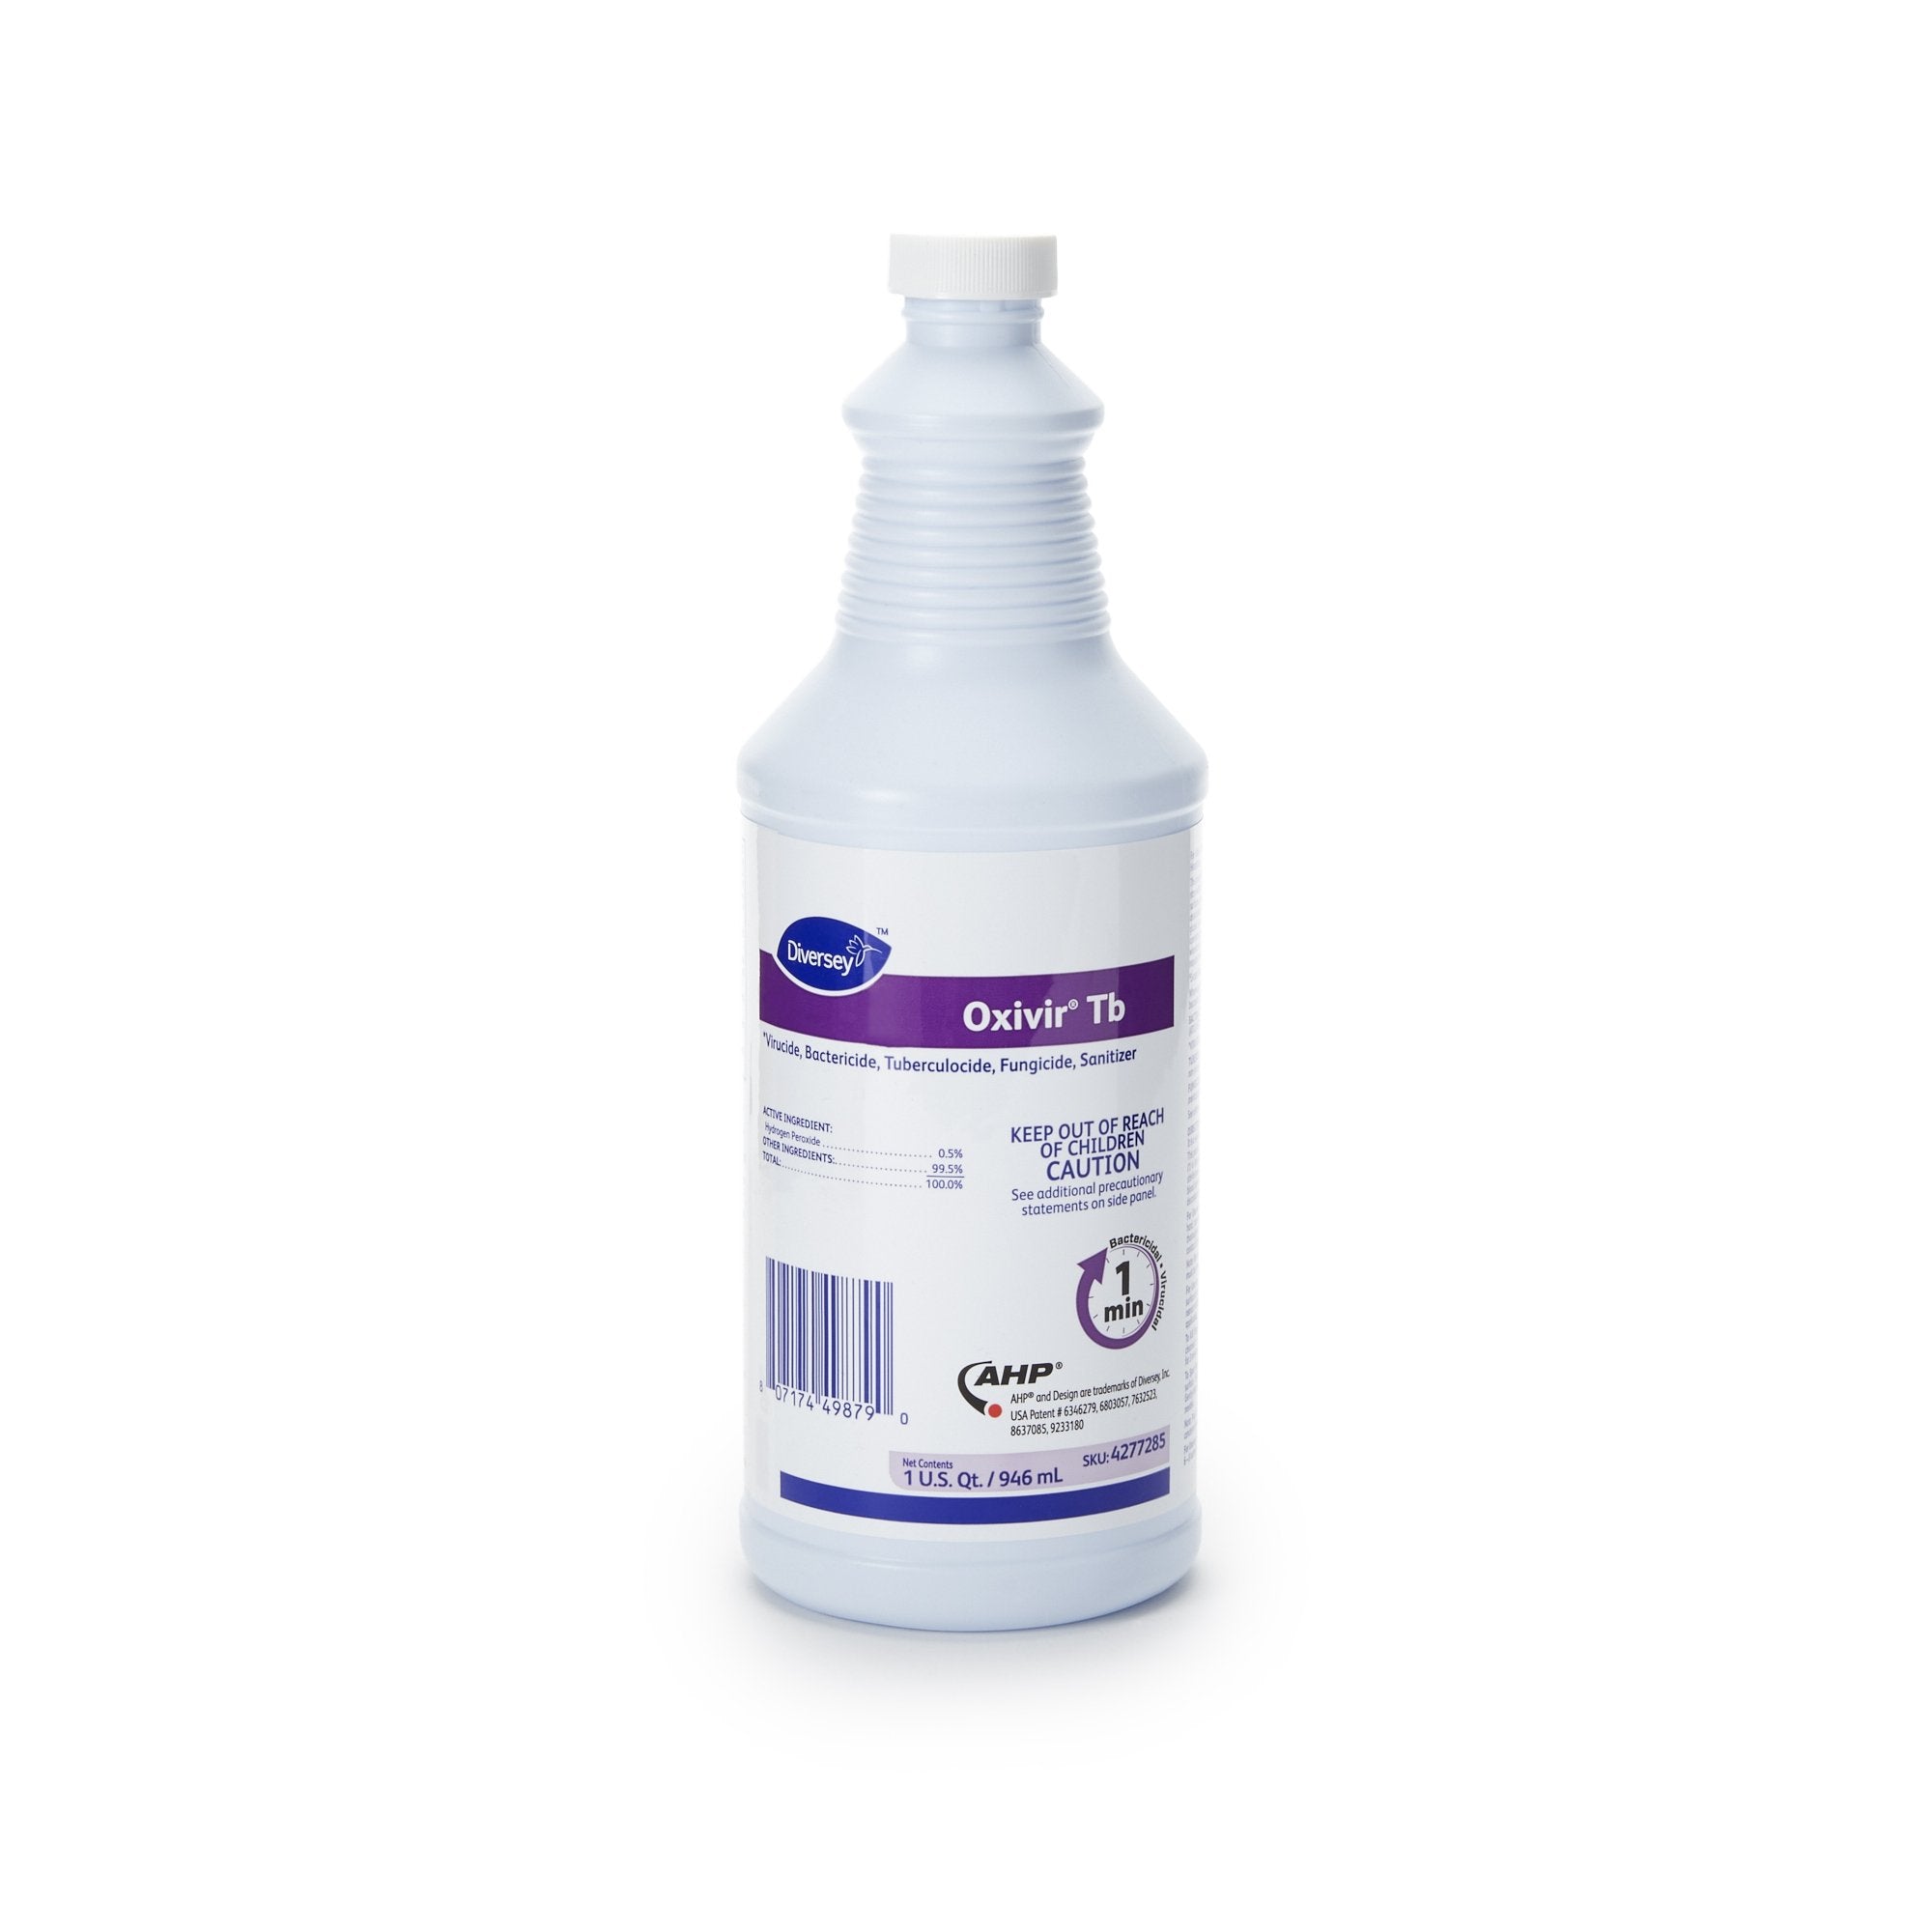 Diversey™ Oxivir® Tb Surface Disinfectant Cleaner Peroxide Based Manual Pour Liquid 32 oz. Bottle Cherry Almond Scent NonSterile